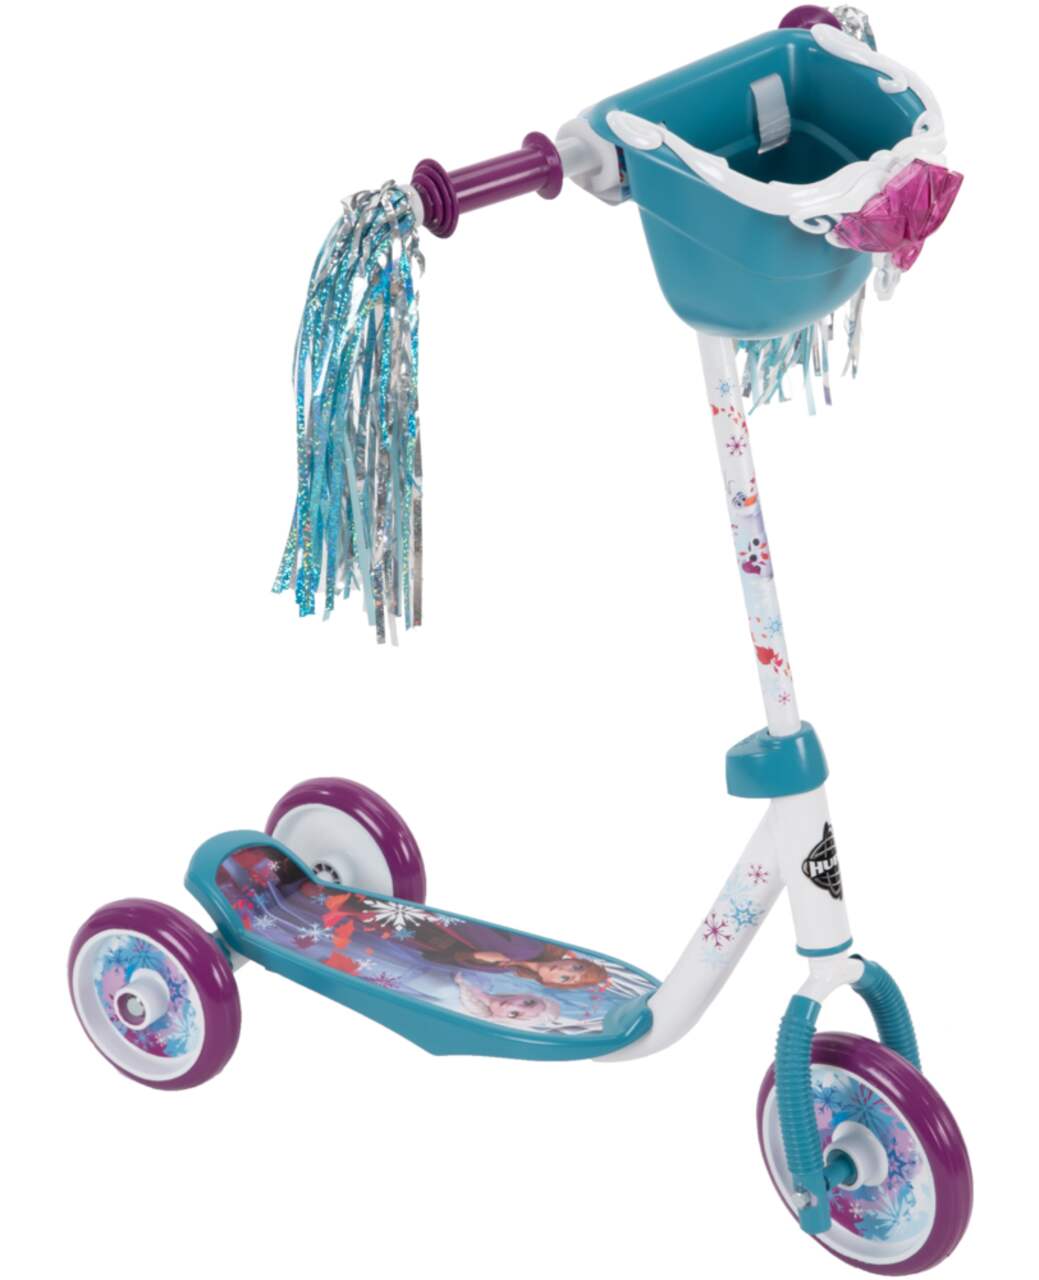 https://media-www.canadiantire.ca/product/playing/cycling/wheeled-goods/0847098/frozen-preschool-scooter-38b4100c-25d5-4649-8008-873f486c3167.png?imdensity=1&imwidth=1244&impolicy=mZoom